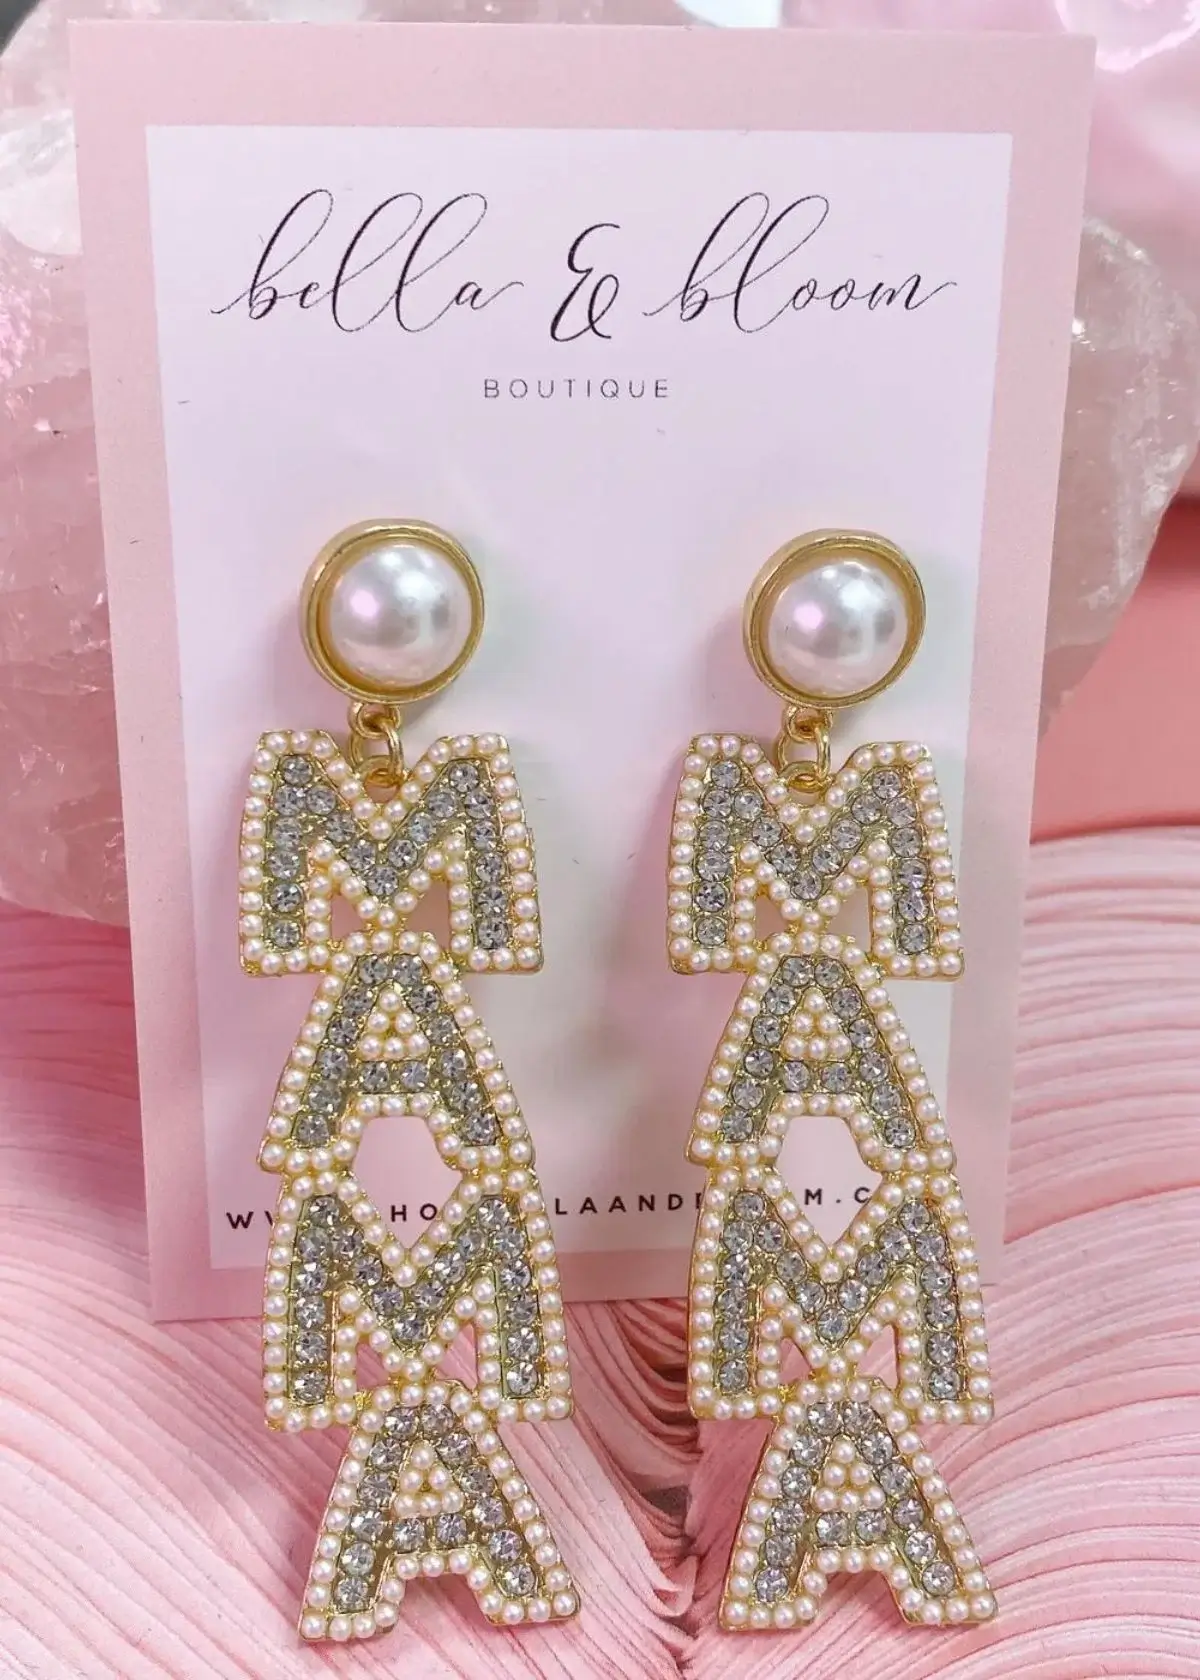 How to Choose the Right Mama Earrings?